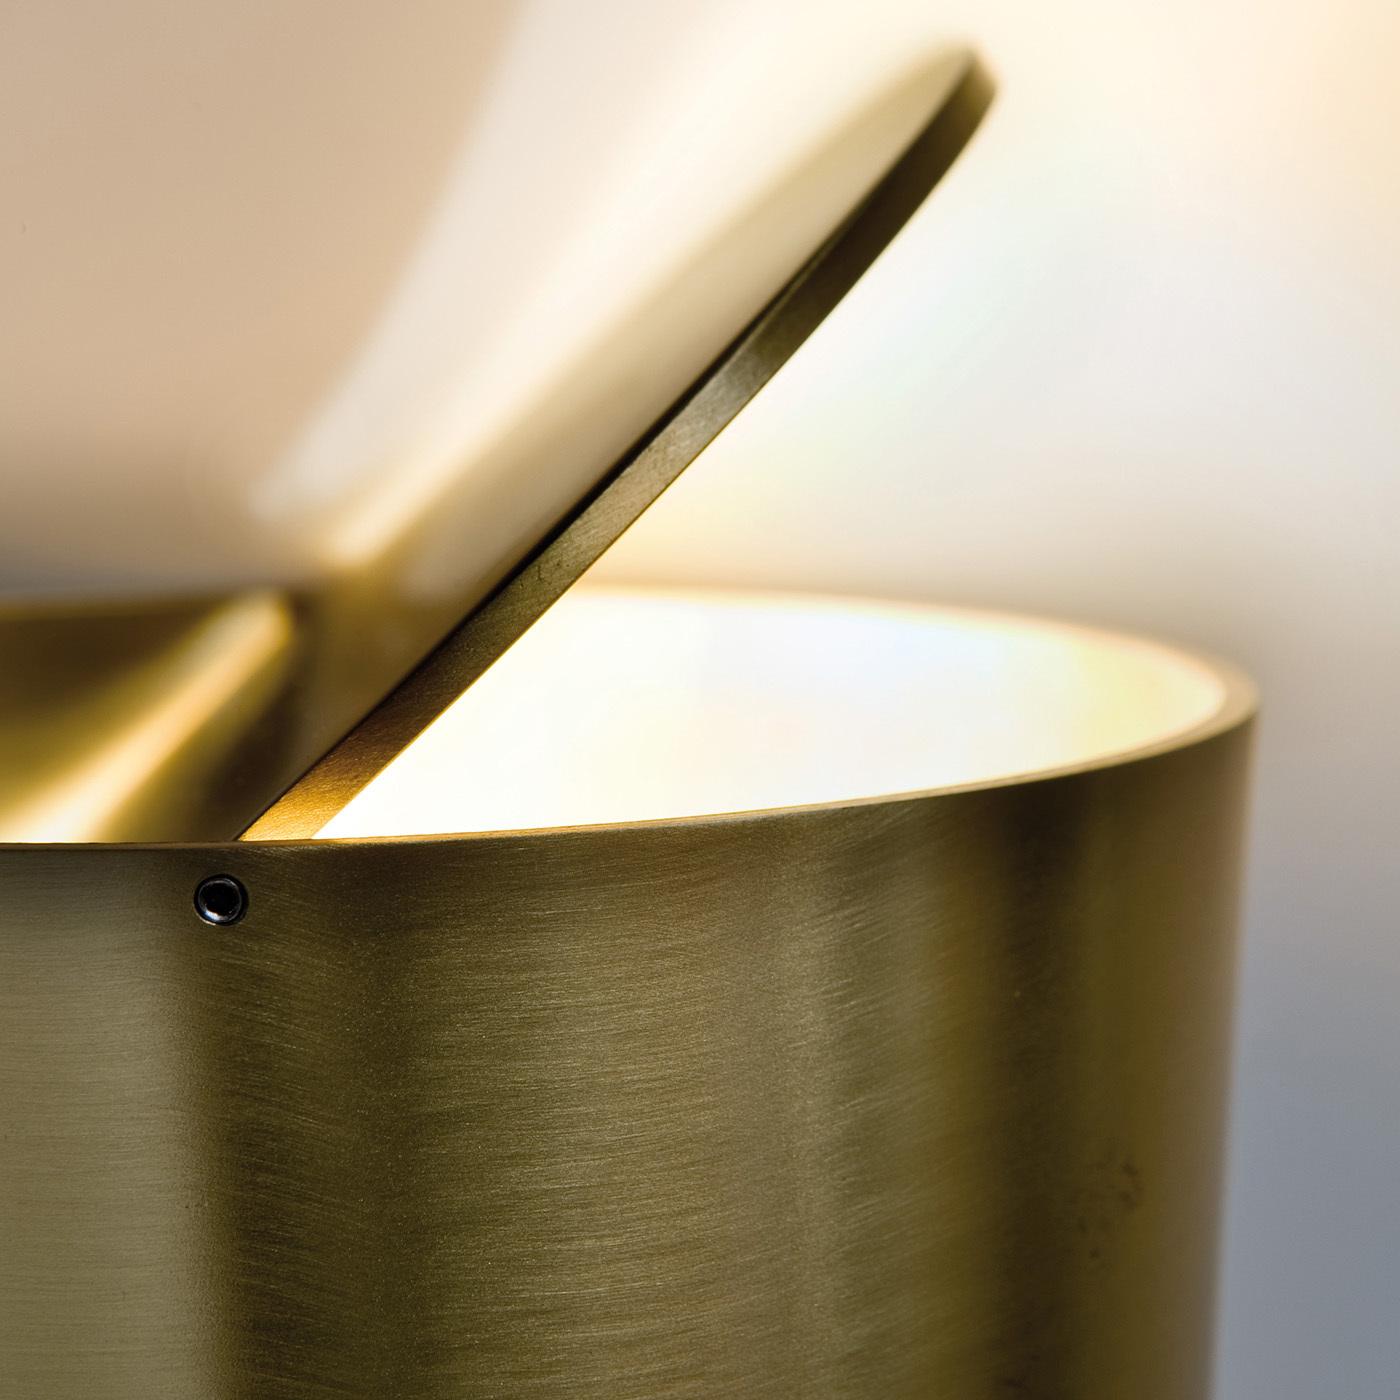 The innovative Tubo table lamp features an elegant satin brass structure with an ingenious adjustable upper disc for calibrating the light's intensity and direction. This sleek, smart lamp is the perfect piece for those discreetly elegant home or